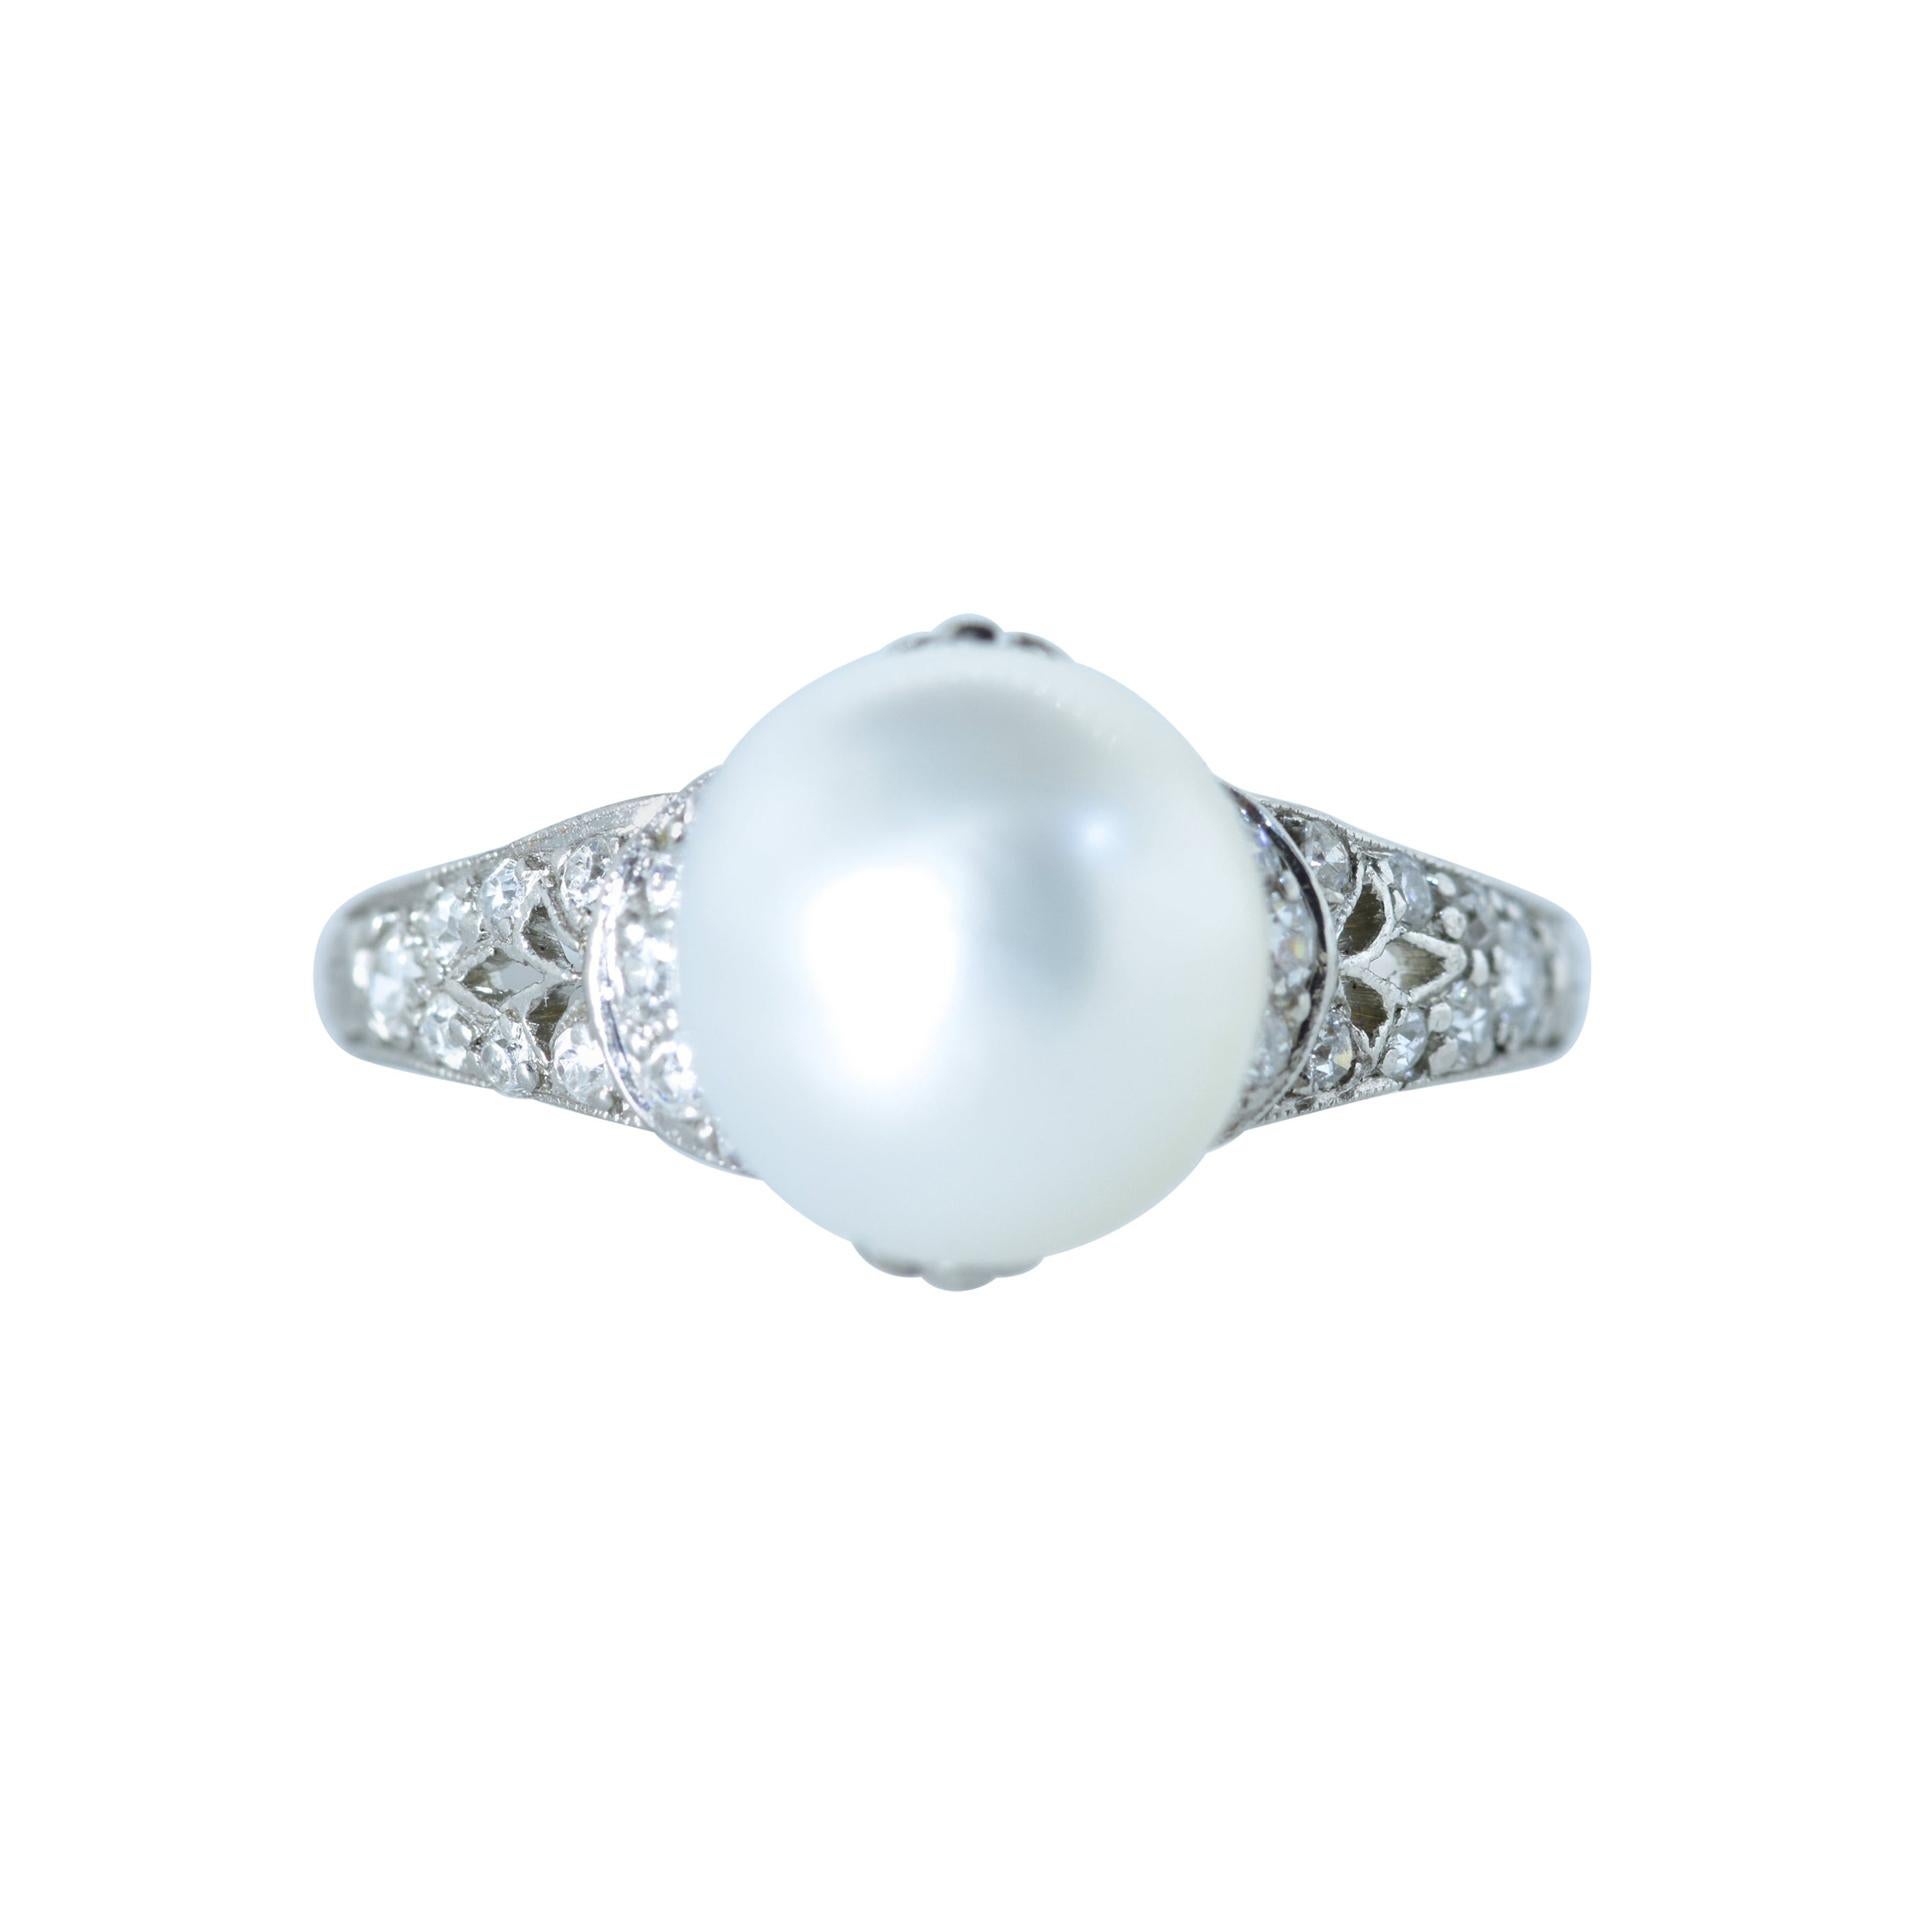 Natural Pearl, platinum and diamond ring centering a very fine natural salt water pearl.  This large natural pearl has been examined by the Gemological Institute of American and has been identified as a natural salt water pearl species, Pinctada